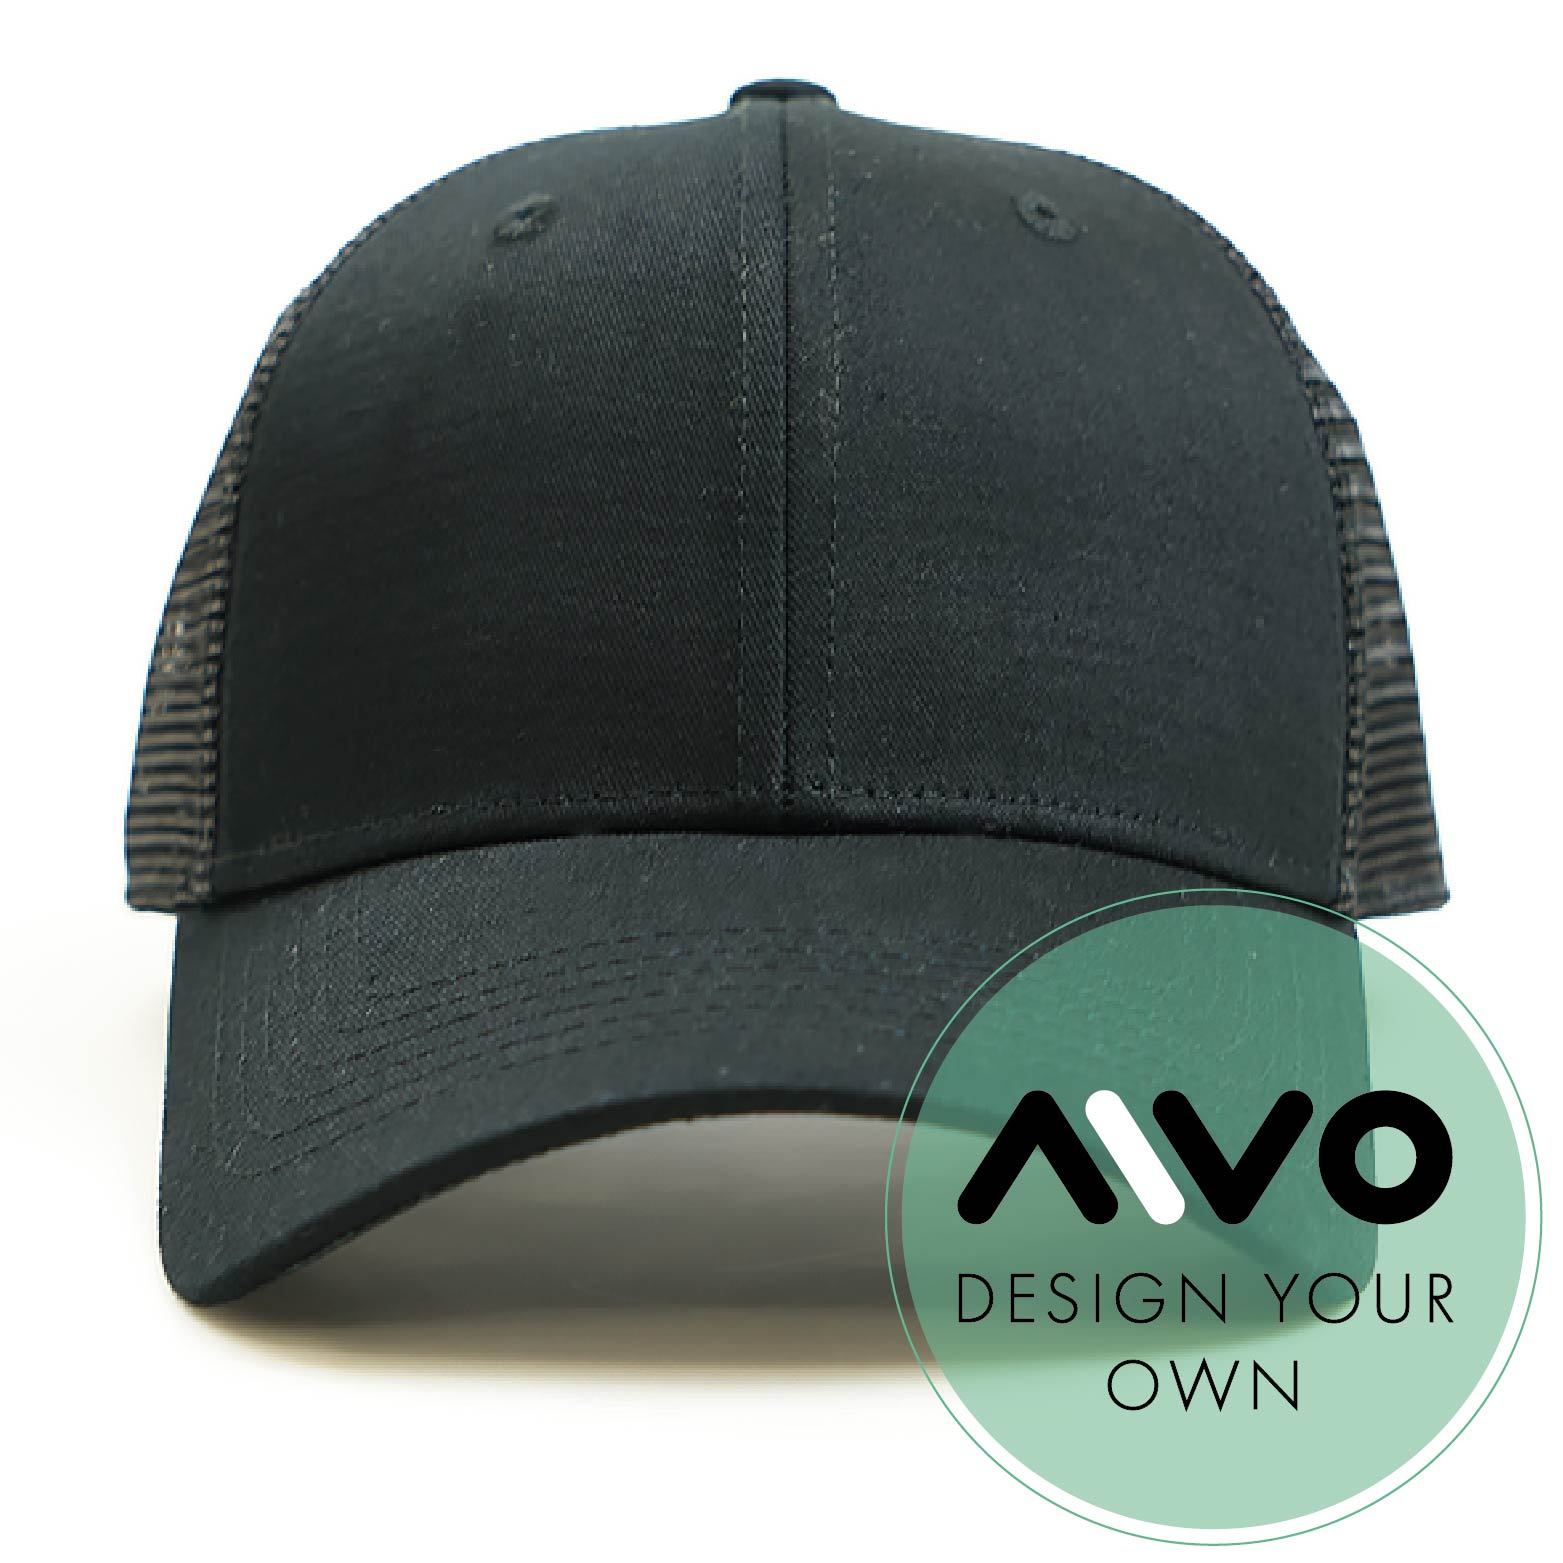 Trucker Cap with Mesh back - design your own and add your own logo in black